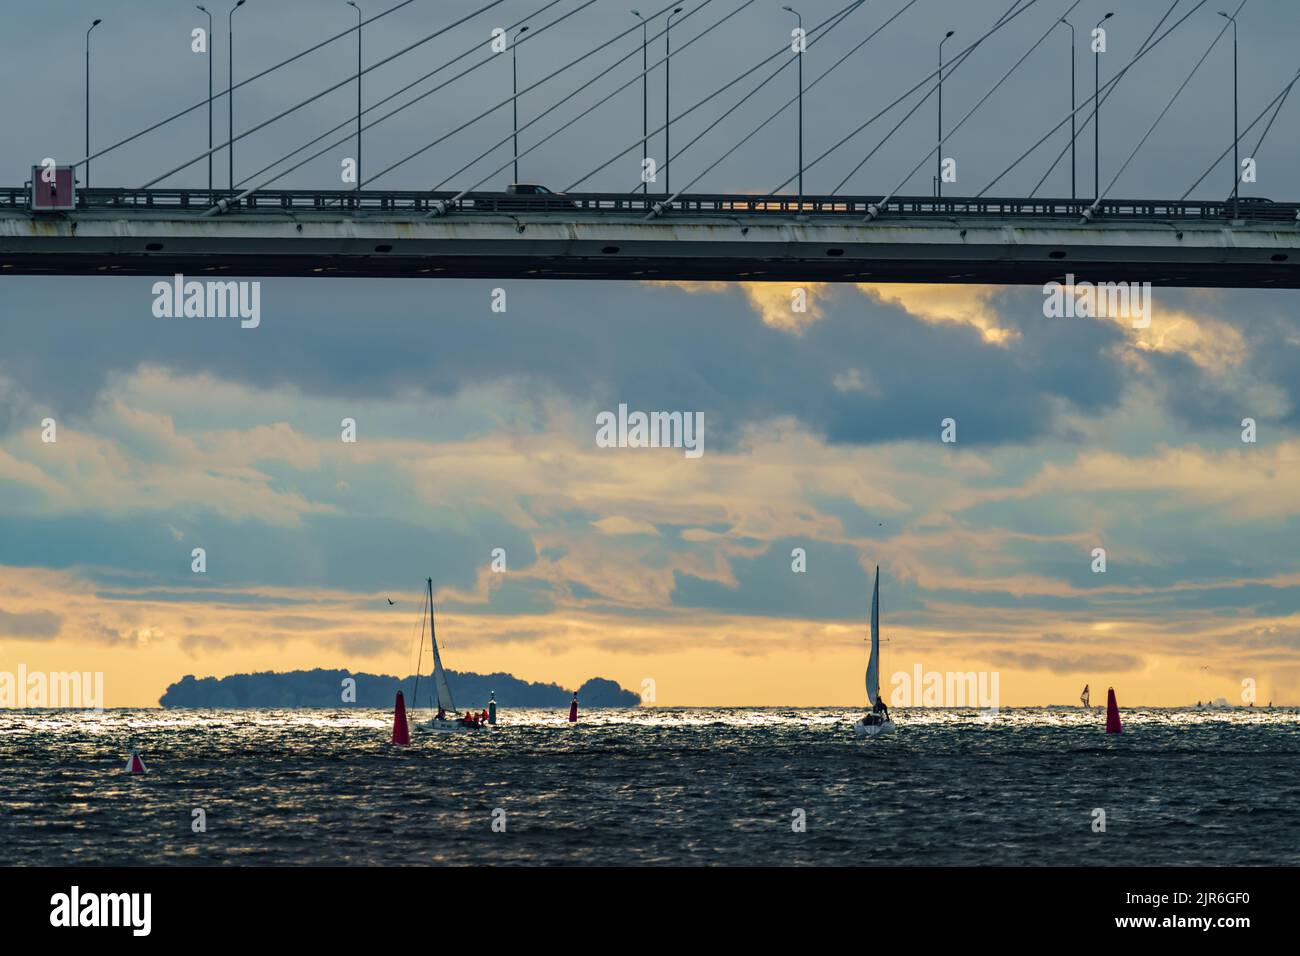 Russia, St. Petersburg, 29 July 2022: Few small sport sailing boats at sunset with stormy sky, highly cable-stayed bridge on background Stock Photo